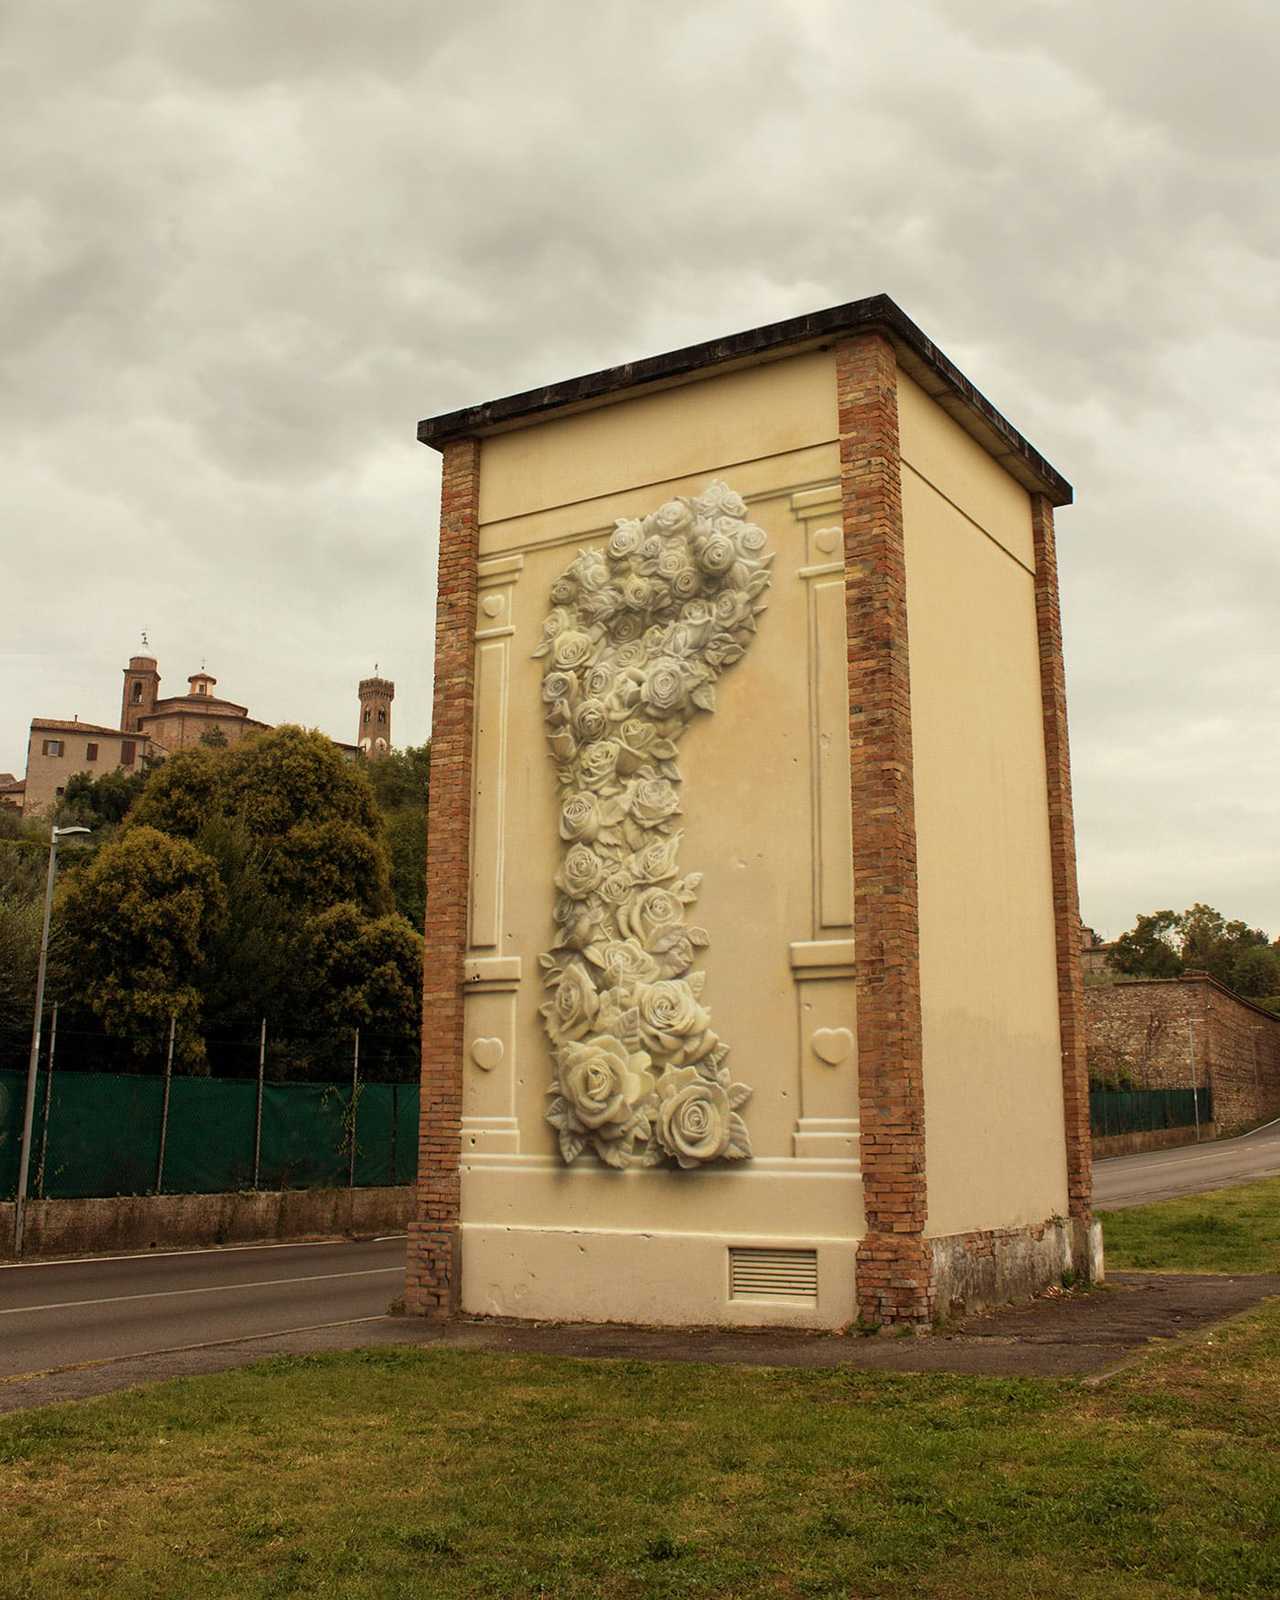 A Fist of Flowers Presents a Message of Unity on the Streets of Santarcangelo